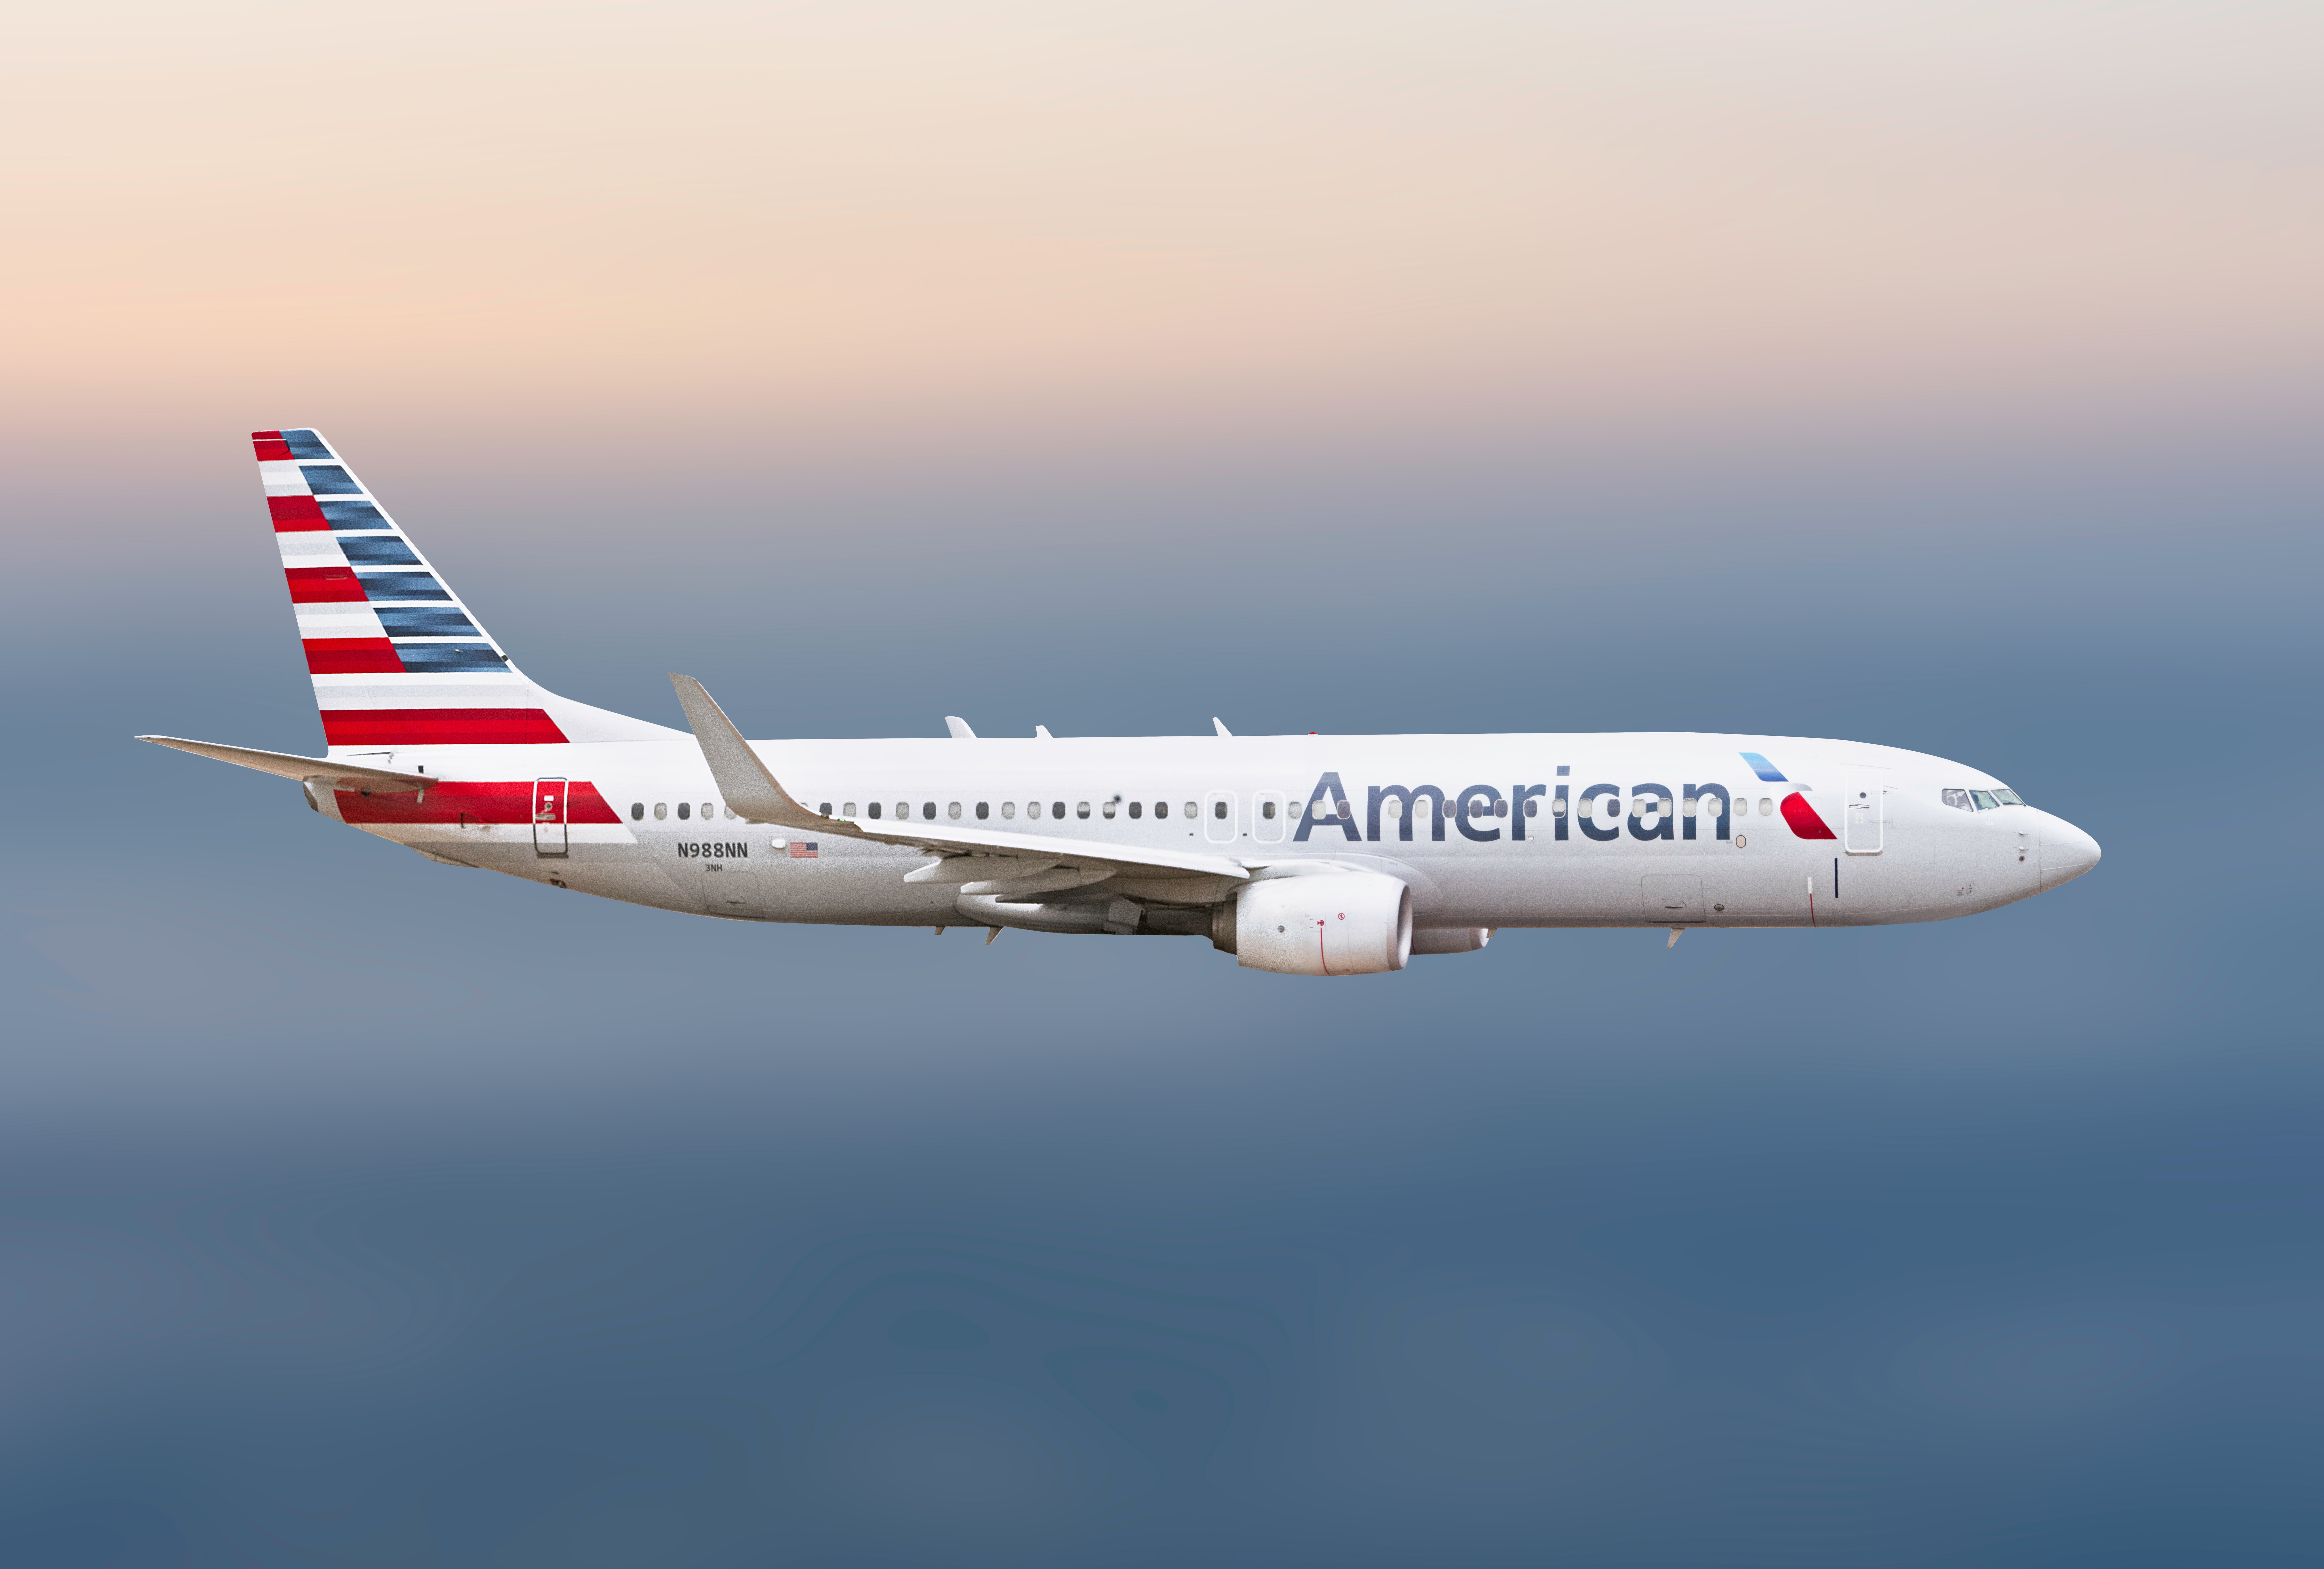 American Airlines To Add More Flights In The Upcoming Year